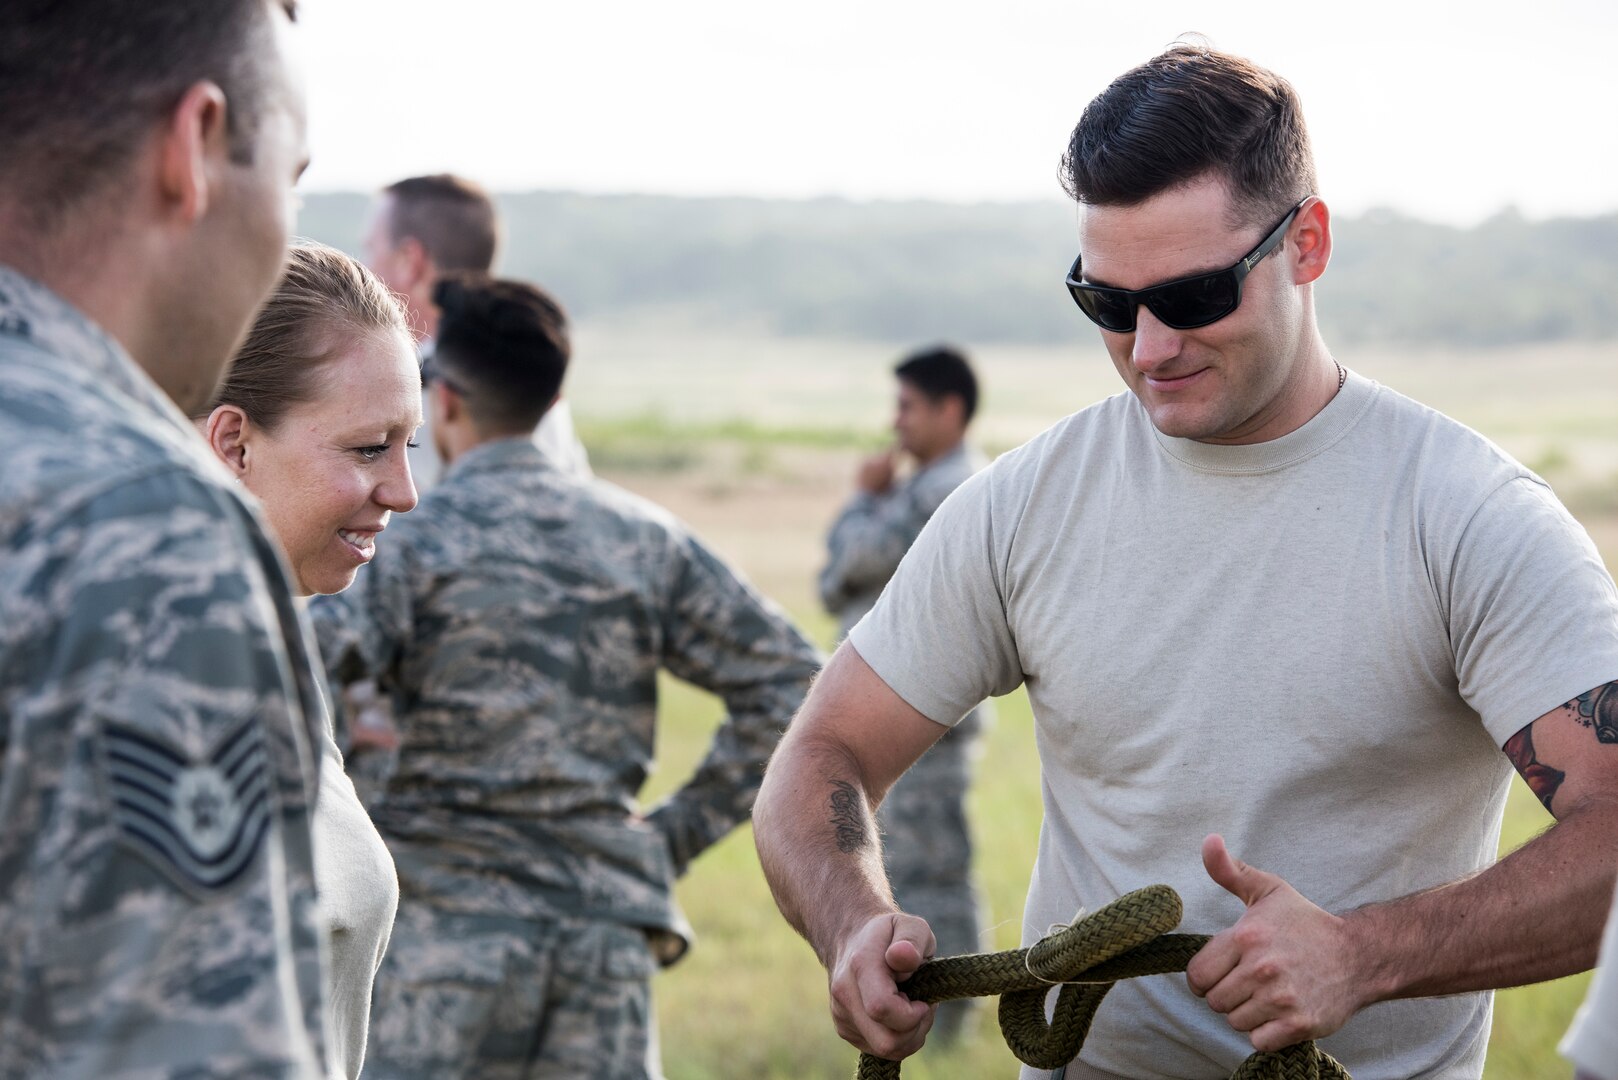 SSgt Nicholas Wilkinson, 26th Aerial Port Squadron aerial transportation technician, practices applying breakaway ties to a sling leg in preparation for a sling load mission as part of OPERATION Lone Star vigilance June 10, 2018, at Joint Base San Antonio-Camp Bullis, Texas. Operation Lone Star Vigilance was a joint-training exercise involving Active-Duty and Reserve Airmen and Soldiers from the Texas Army National Guard from installations across San Antonio. The multi-service missions saw the successful completion of aerial reconnaissance, sling loading of cargo, MEDEVAC hoists, personnel recovery and the simultaneous operation of multiple helicopter landing zones. (U.S. Air Force photo by Senior Airman Stormy Archer)